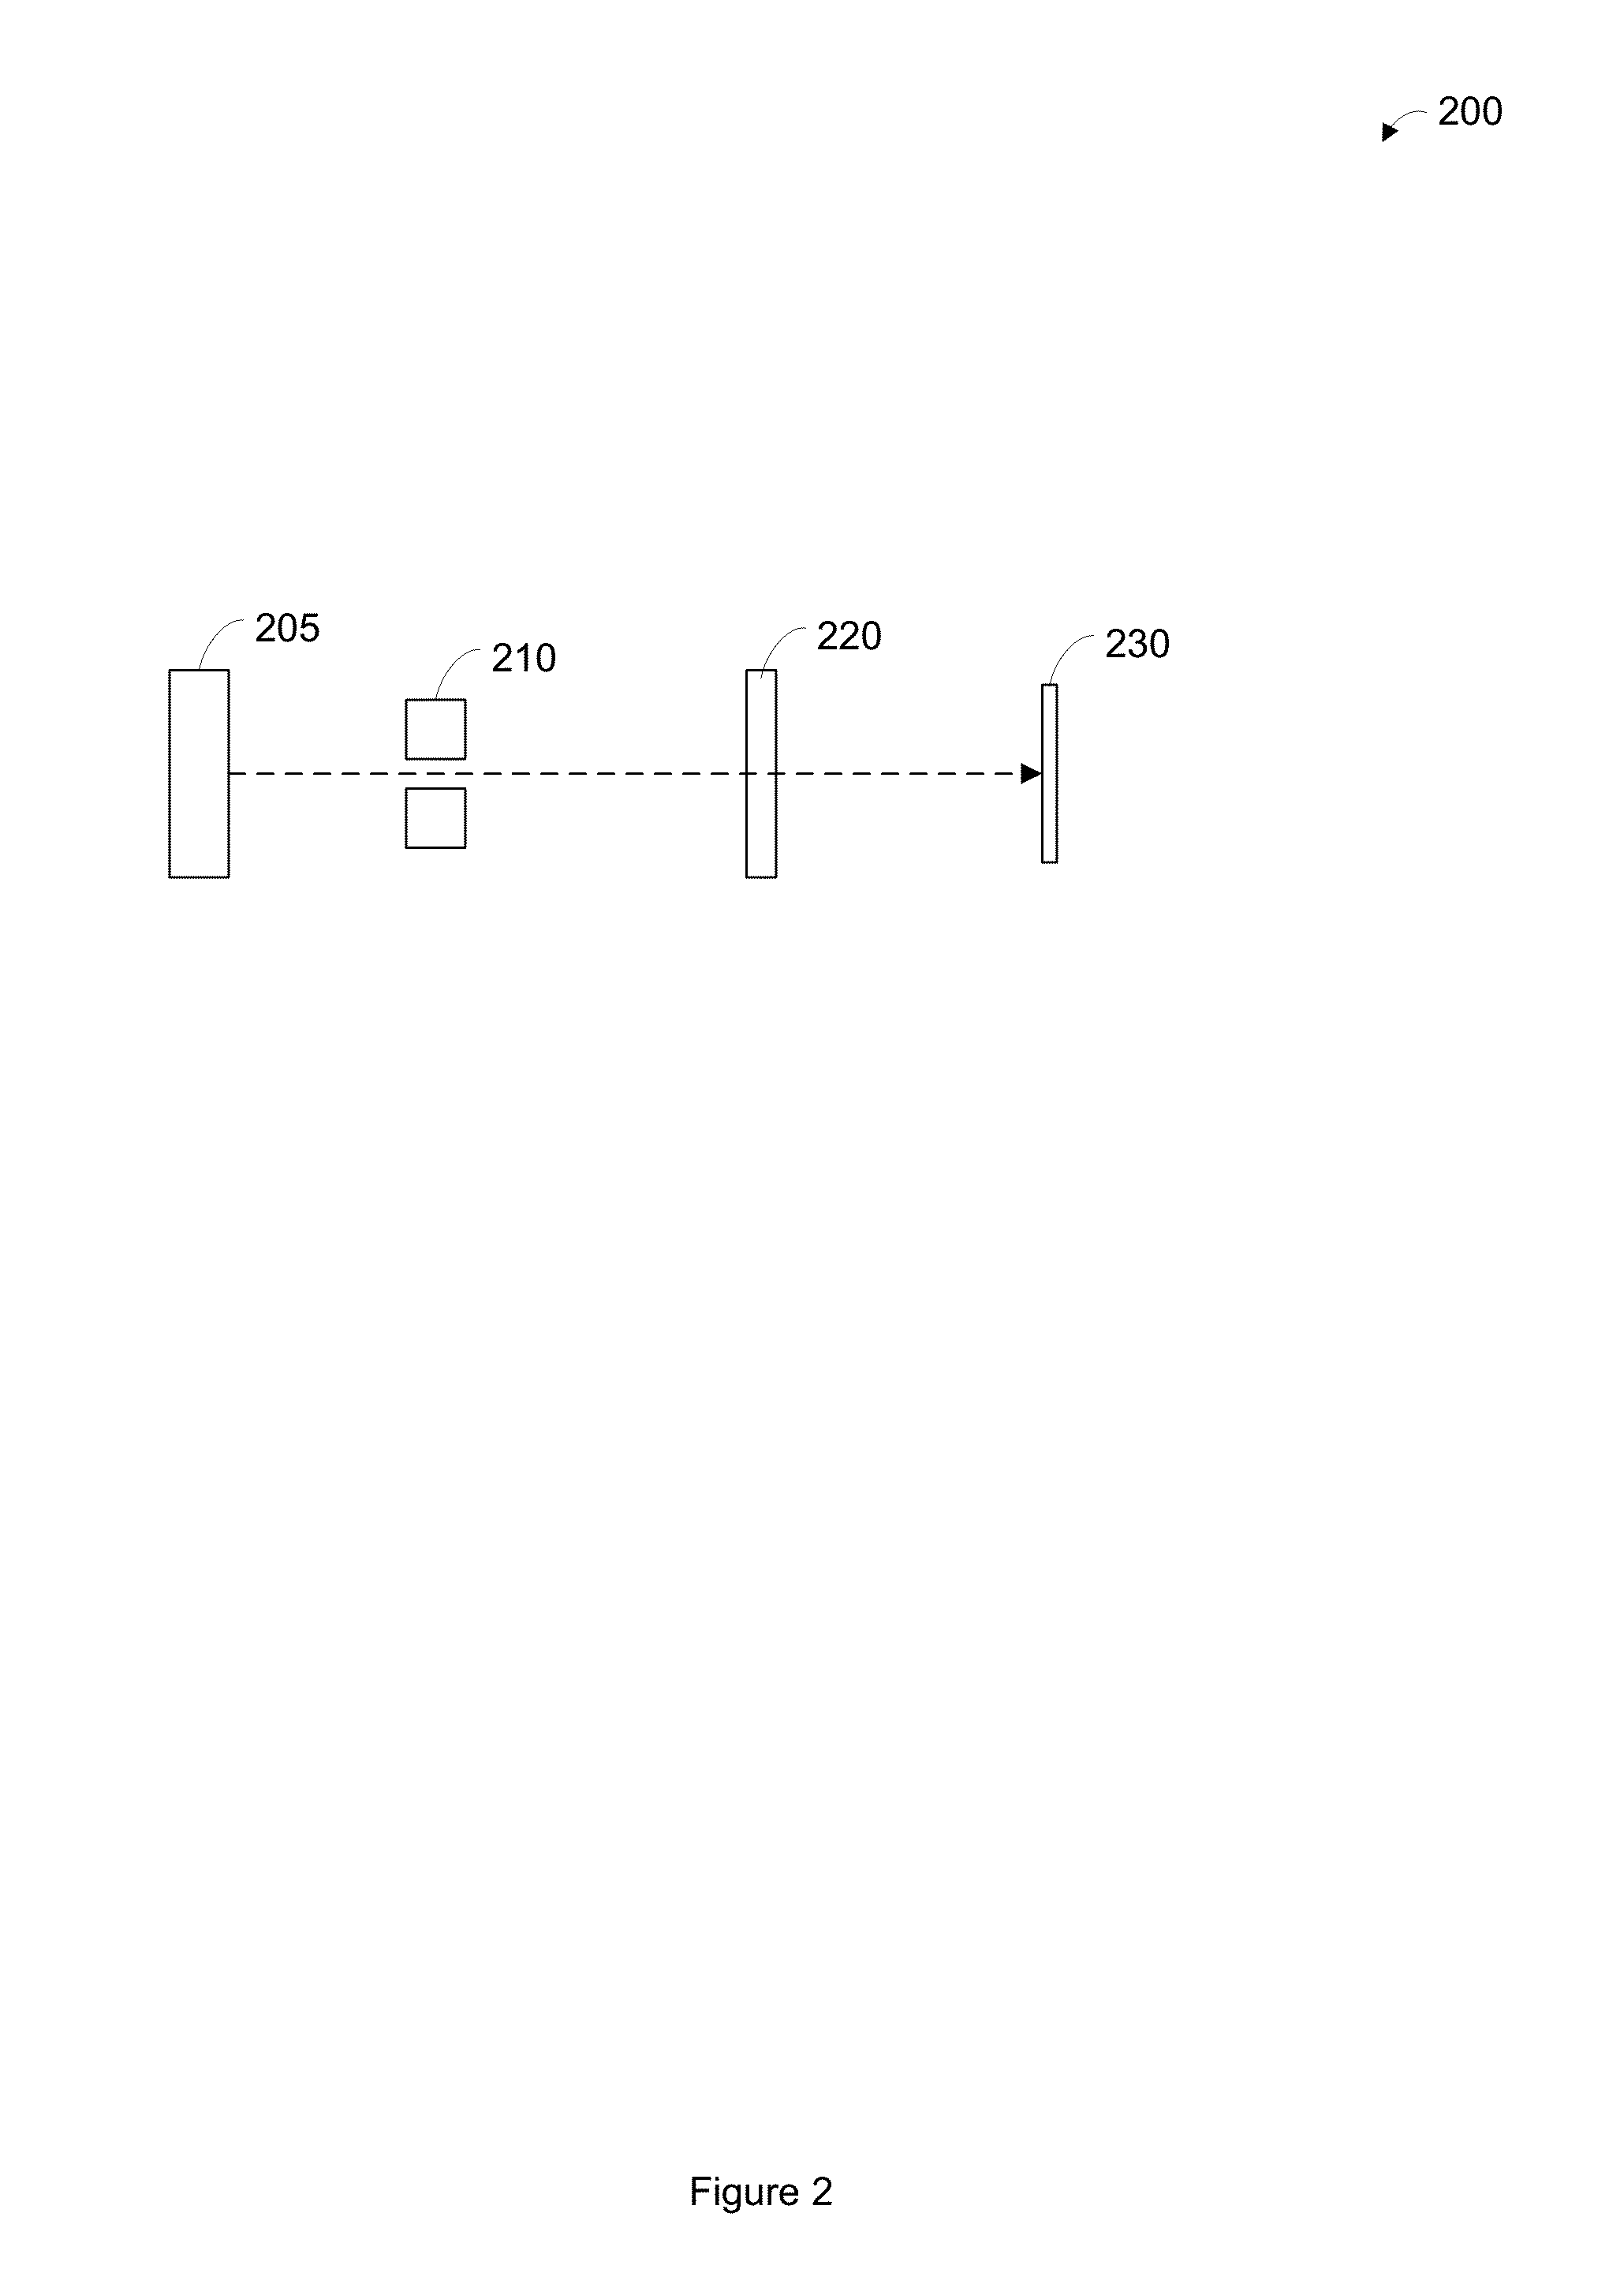 Holographic imaging element operable to generate multiple different images of an object